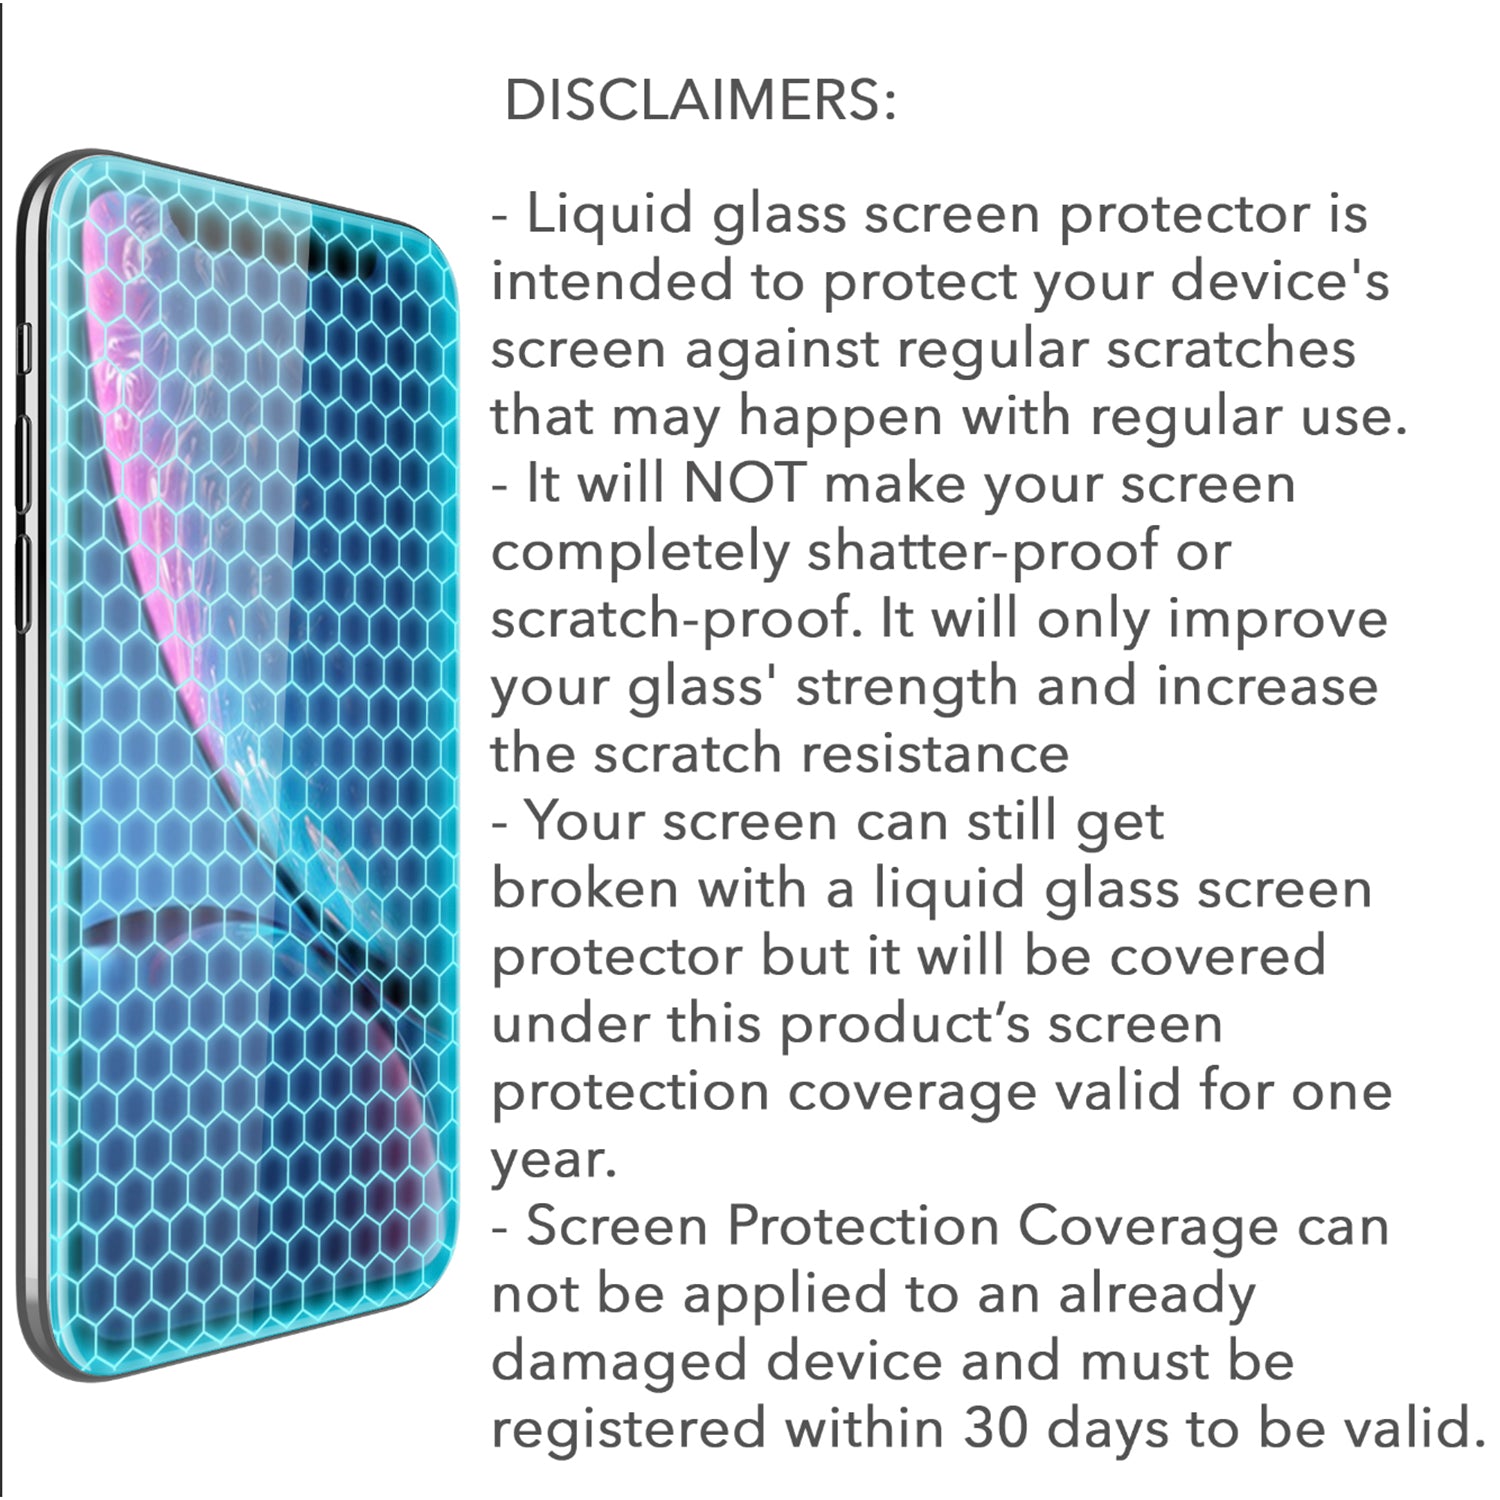 Liquid Glass Screen Protector with $250 Screen Protection Guarantee - Universal